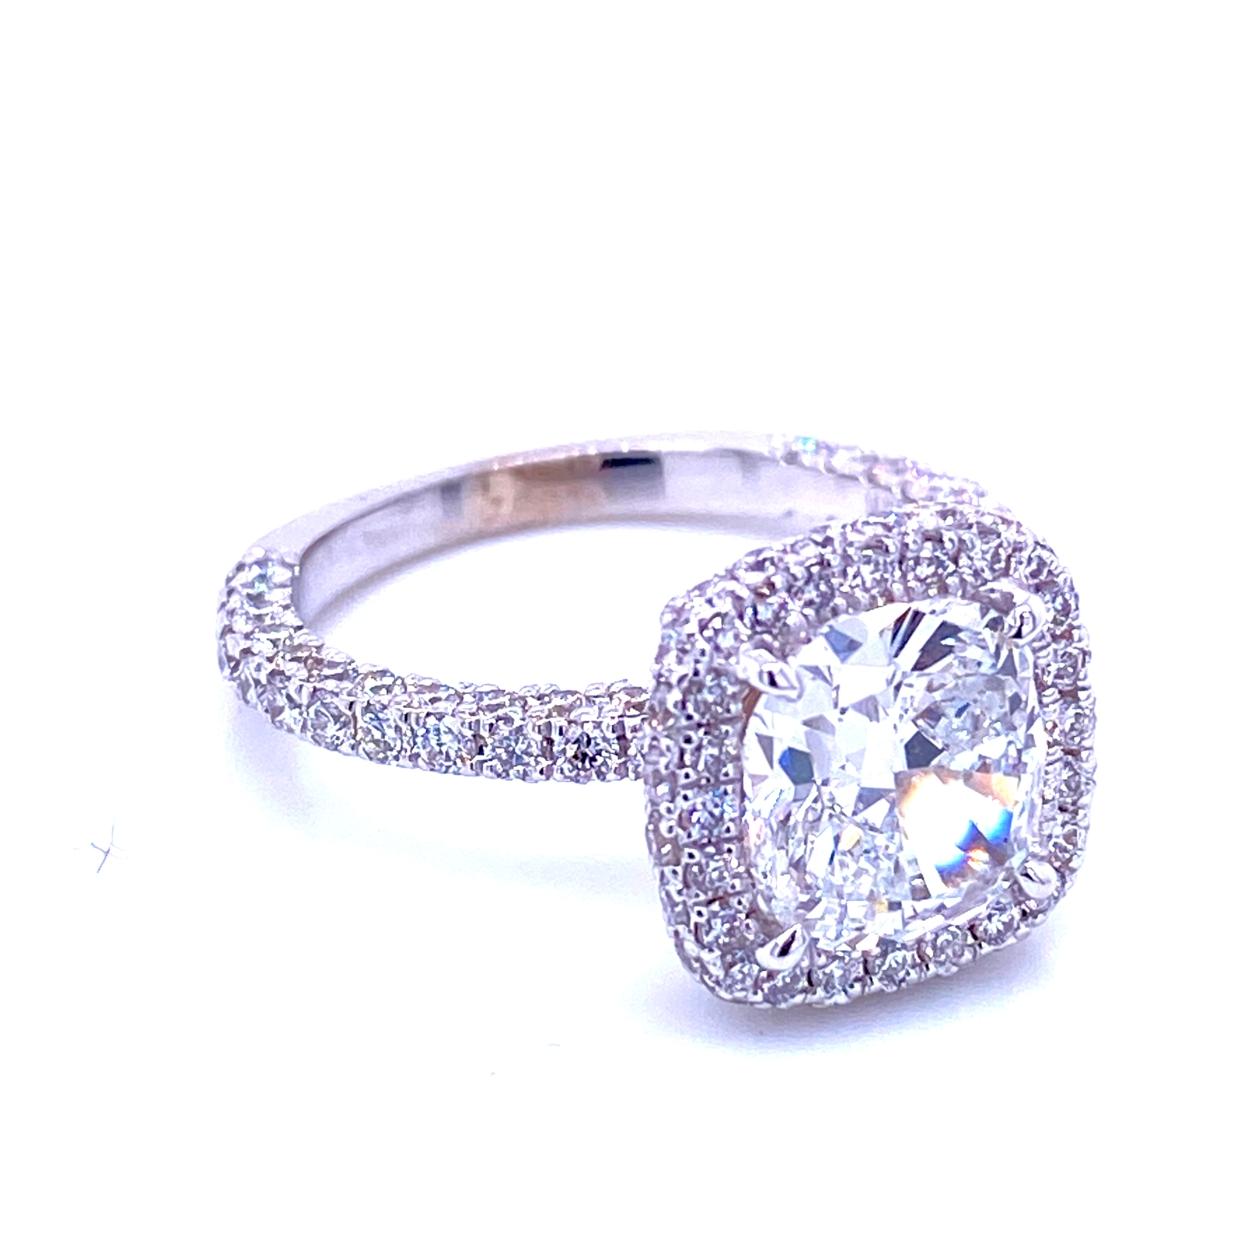 GIA 2.01 Carat D/SI1 Cushion Diamond 18 Karat Pave Set Engagement Ring with Halo In New Condition For Sale In Los Angeles, CA